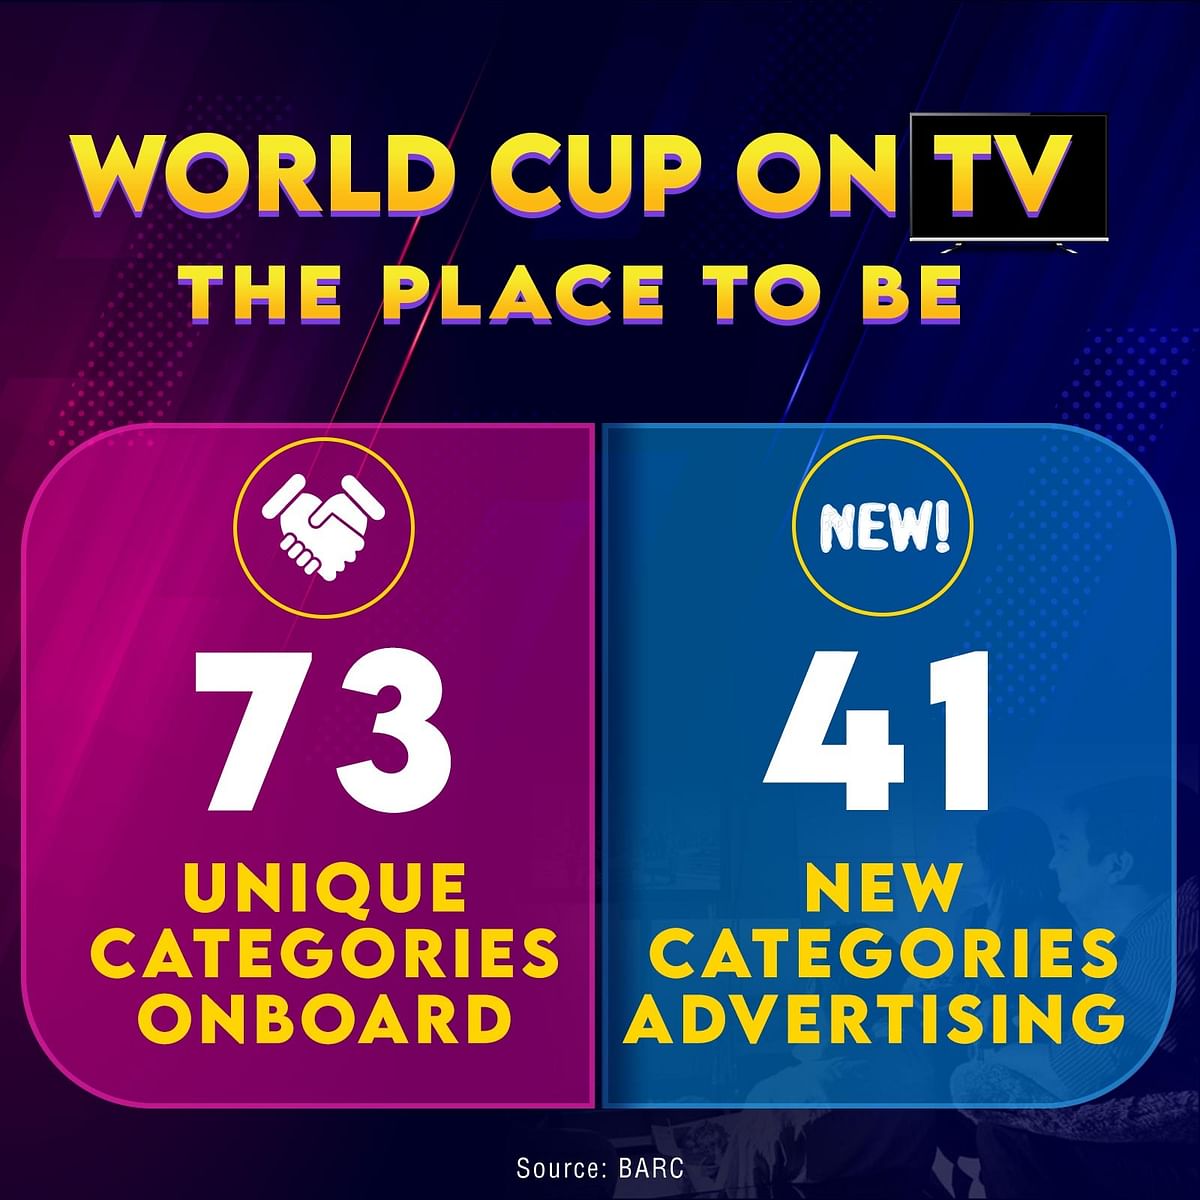 World Cup on Television catapults brand impact by more than 2X across in just 2 weeks